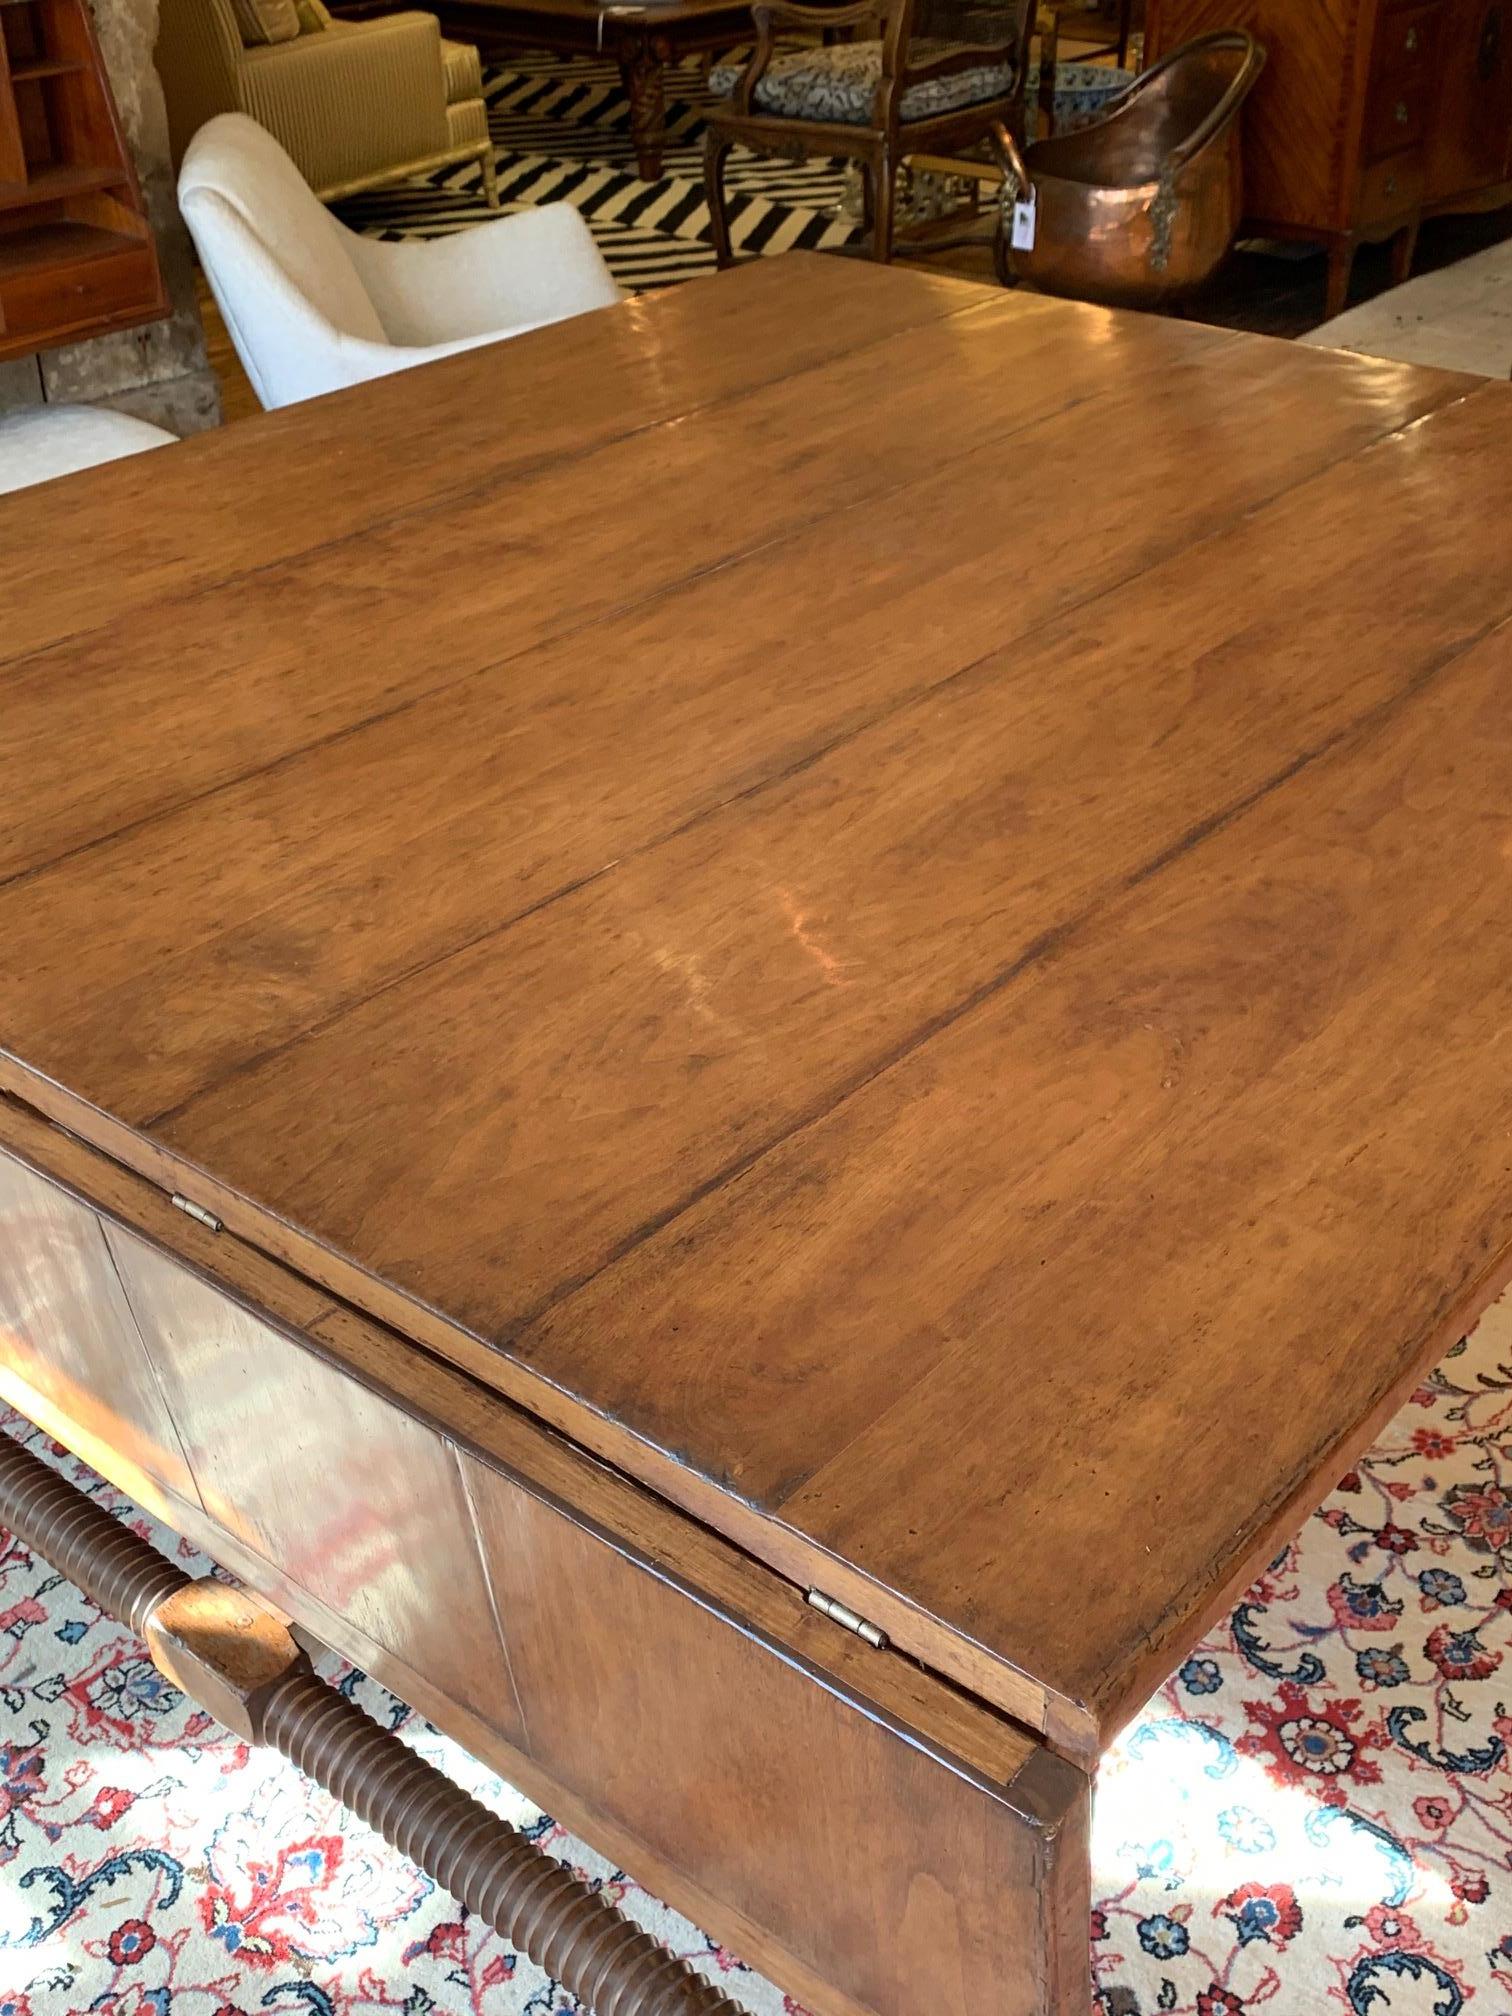 American Very Large Tuscan Style Drop Leaf Center or Dining Table with Drawers